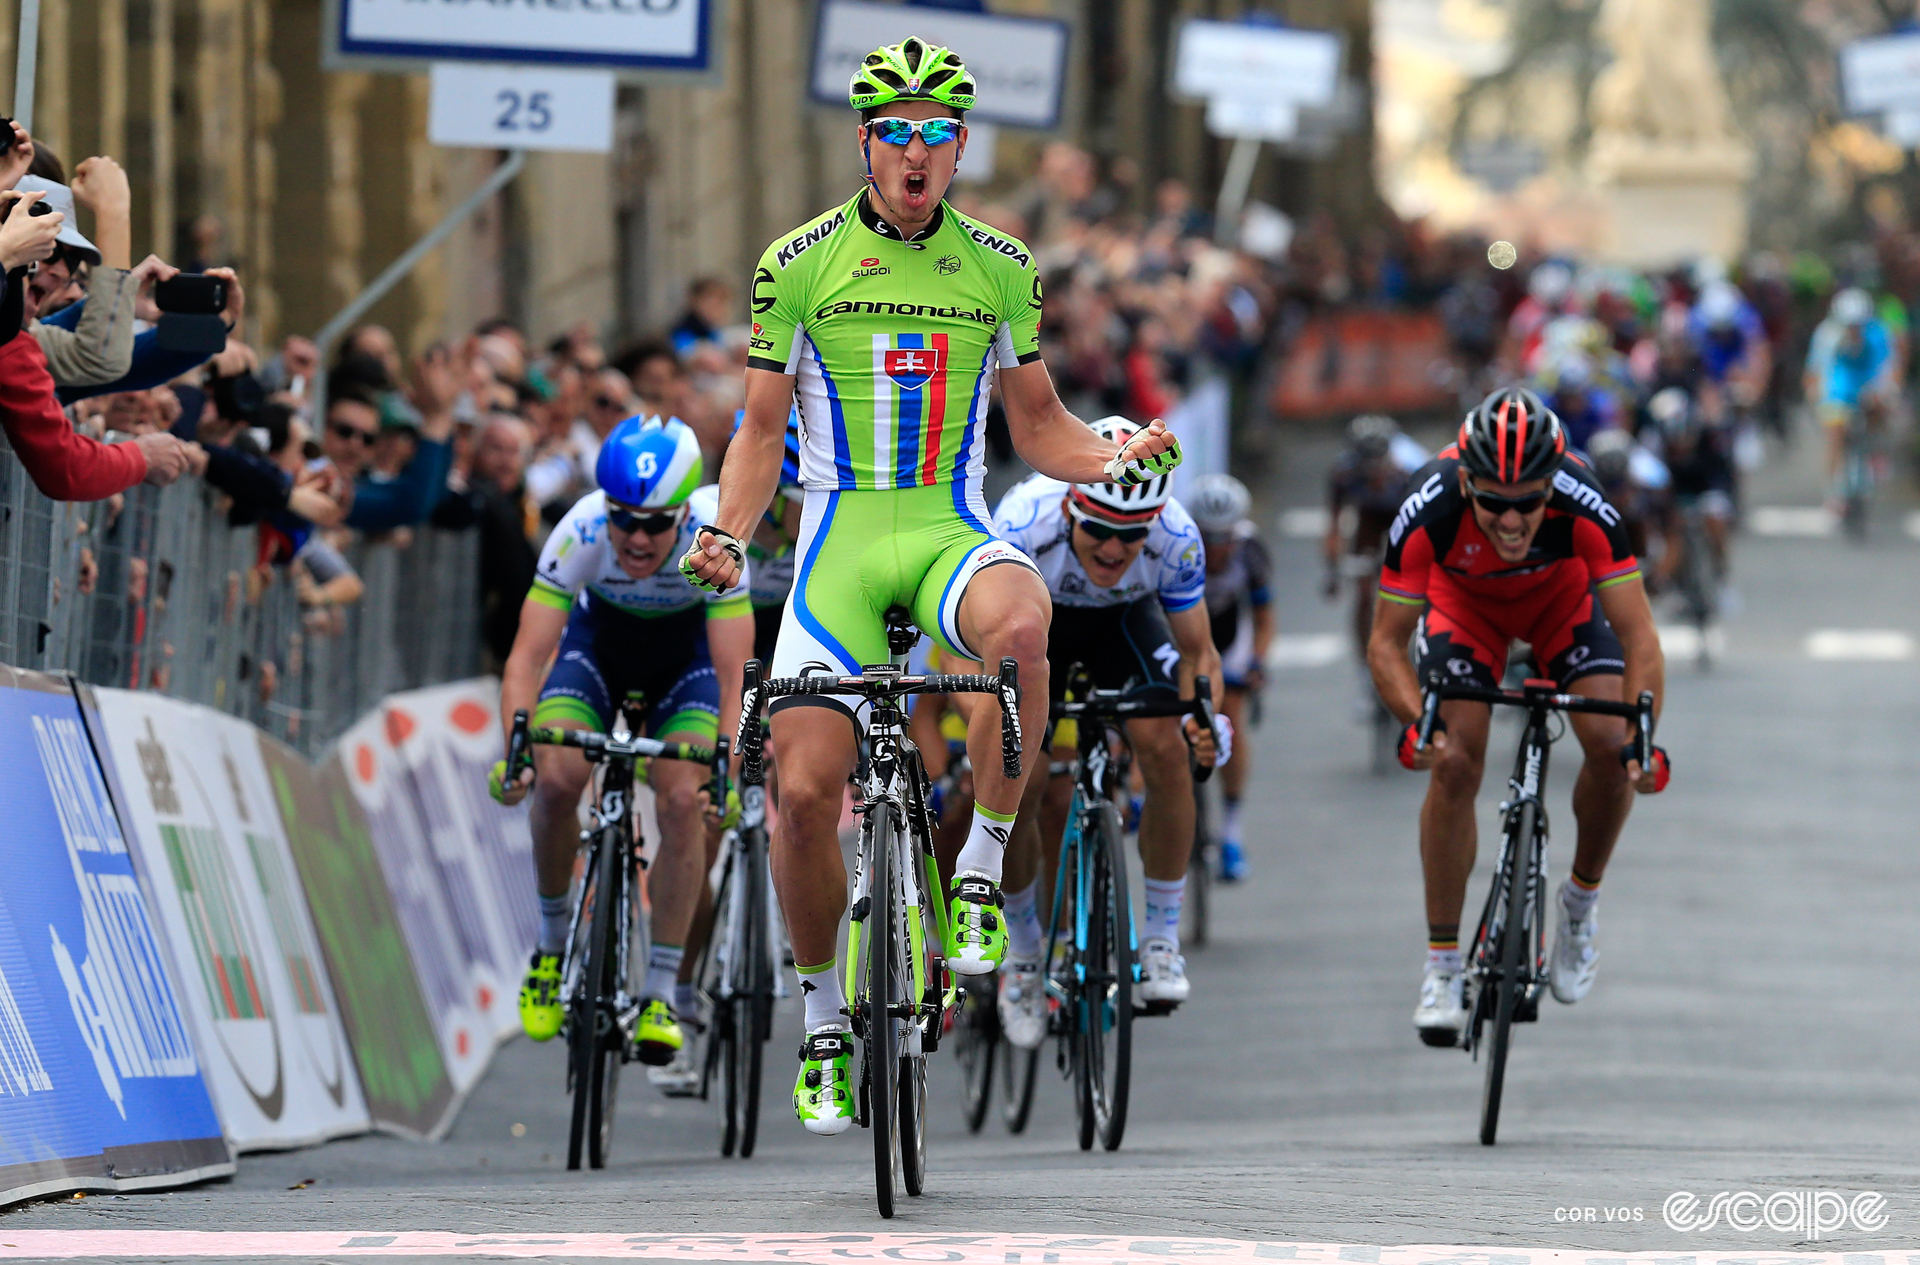 Peter Sagan celebrates winning a stage at the 2014 Tirreno-Adriatico with a delighted yell and double fist-pump.